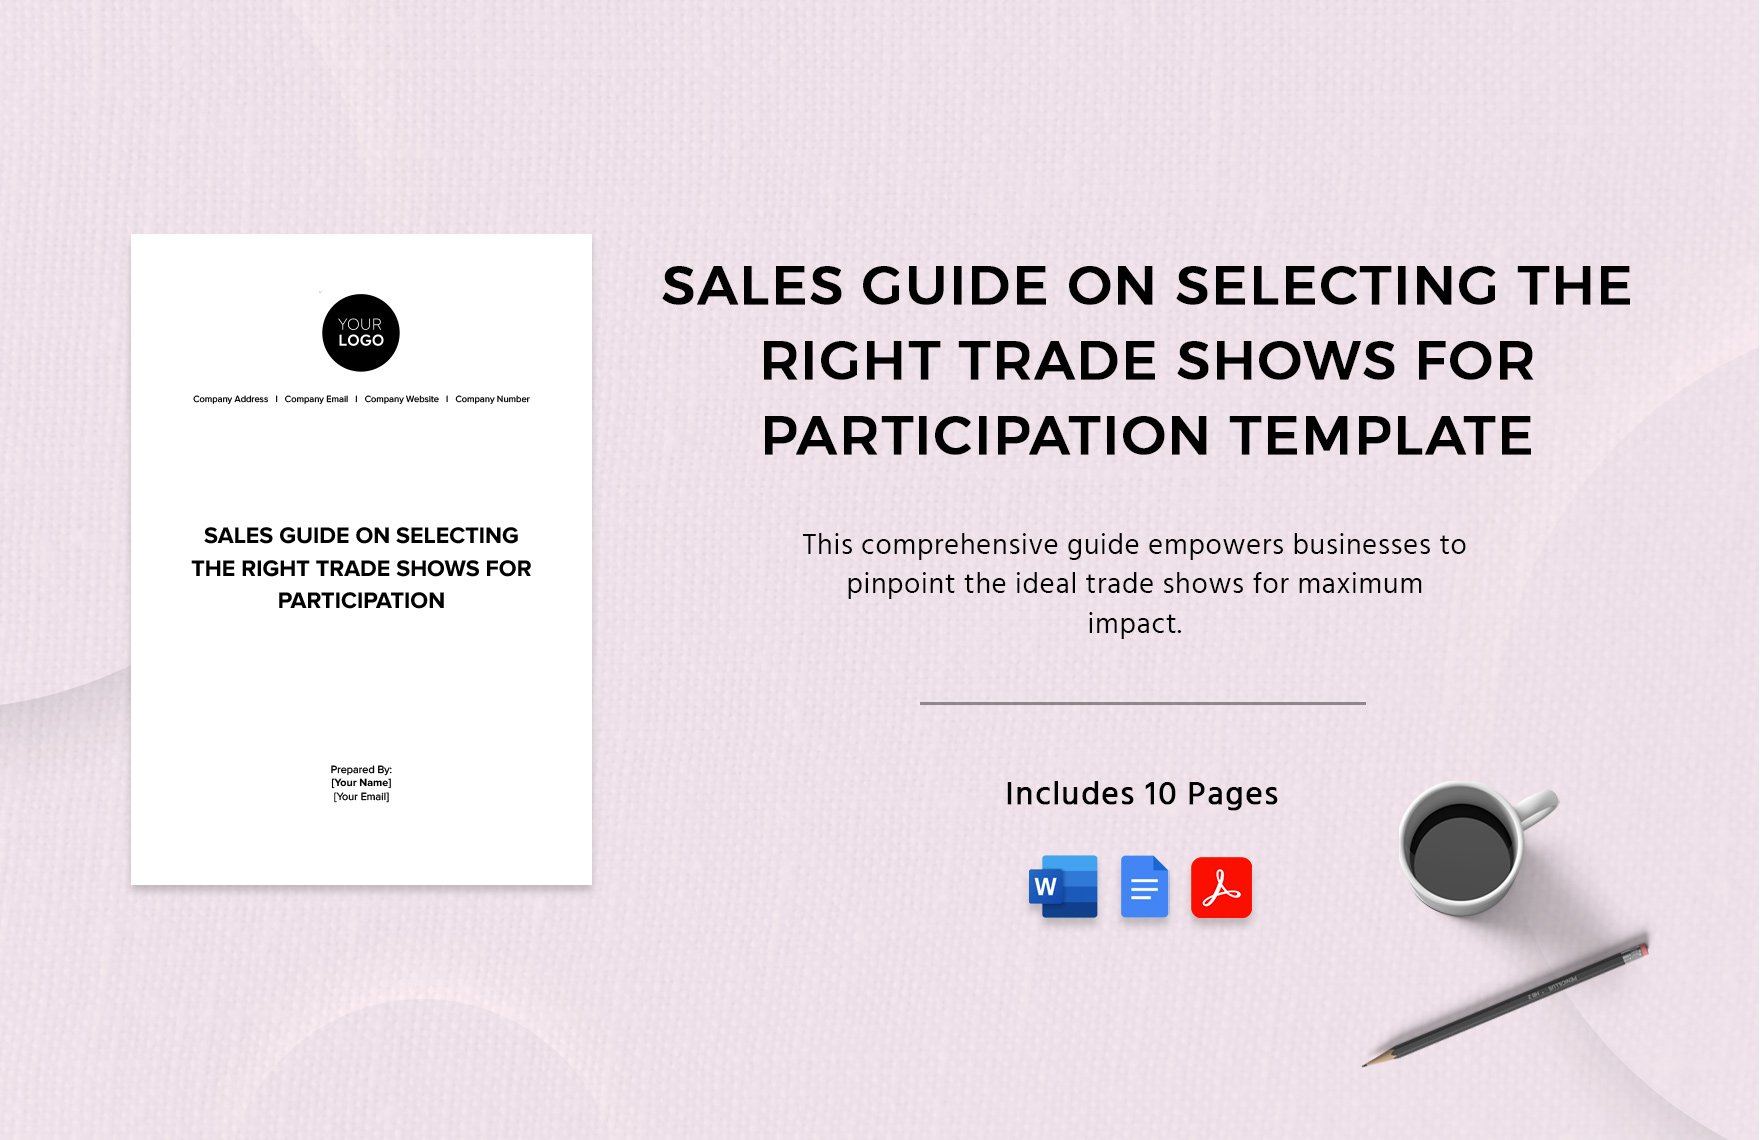 Sales Guide on Selecting the Right Trade Shows for Participation Template